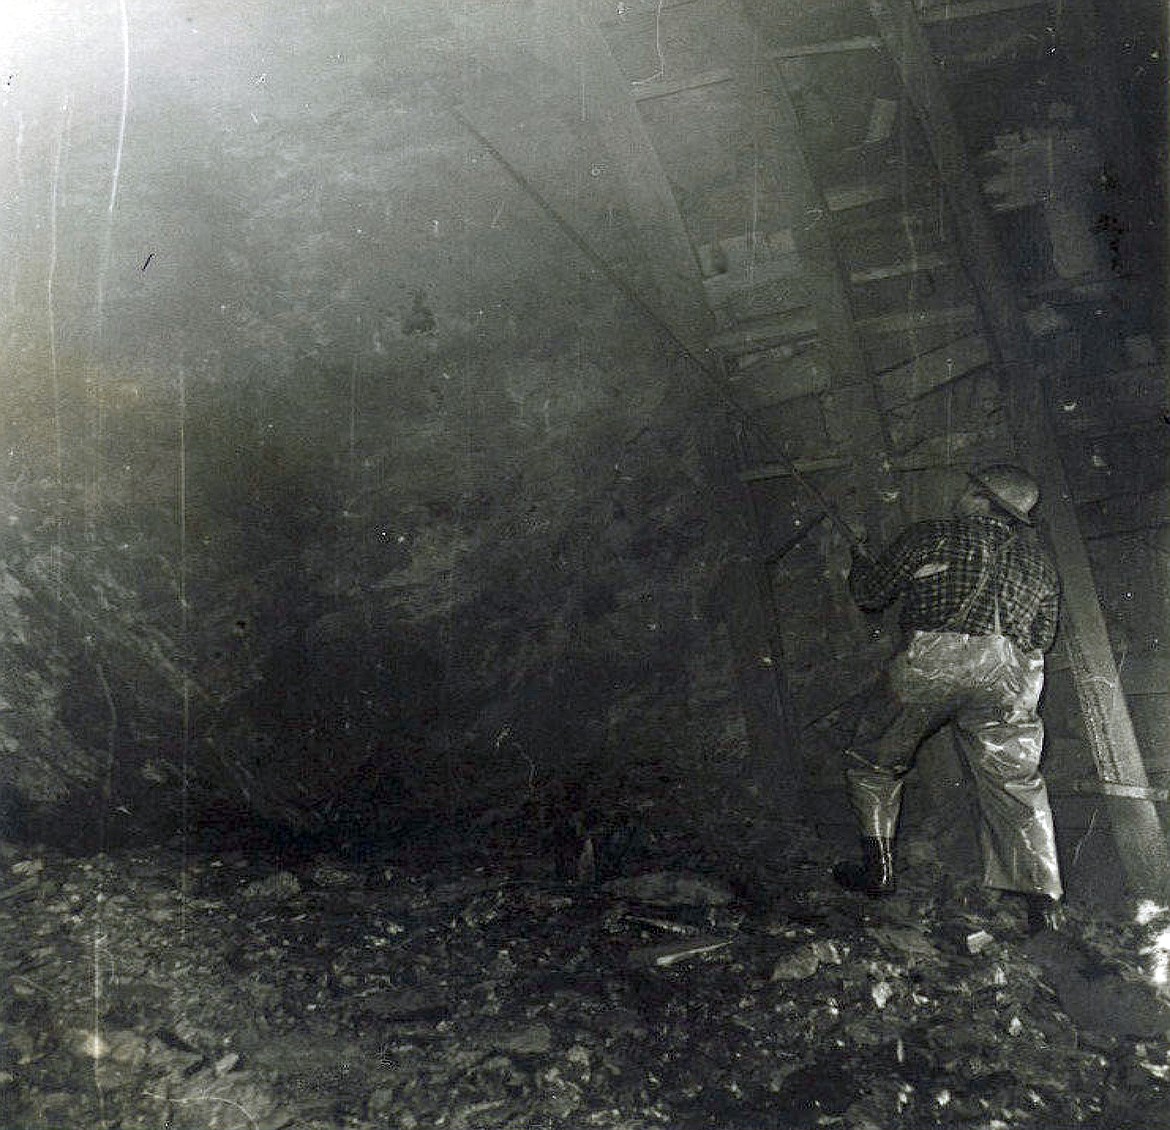 A "picker" checking the ceiling for weaknesses after a round of blasting during the construction of the Flathead Tunnel. The worker was later killed by a falling rock. (Bruce Morse photo)